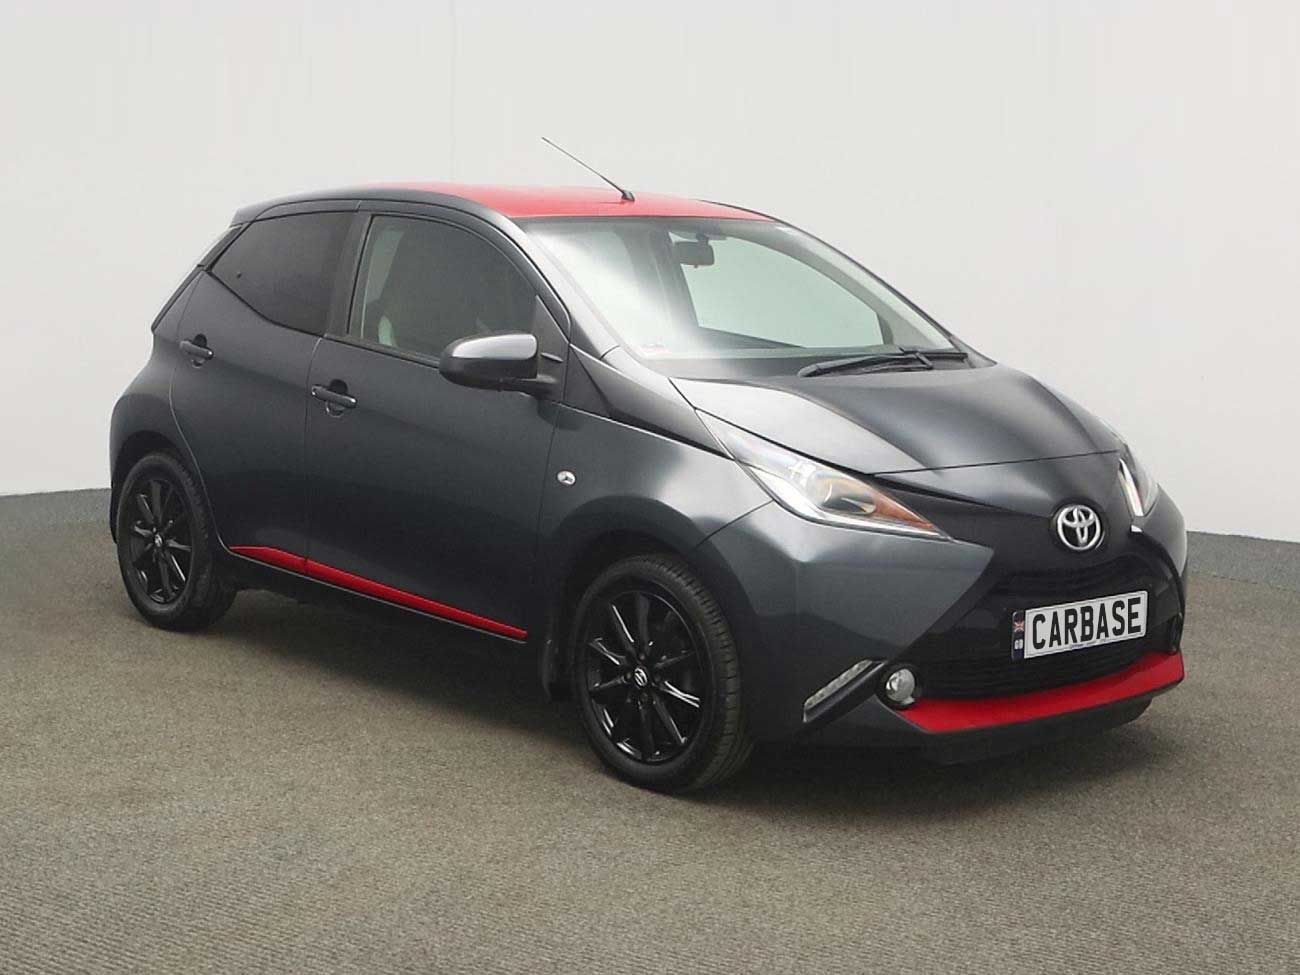 Side view of Toyota Aygo in showroom